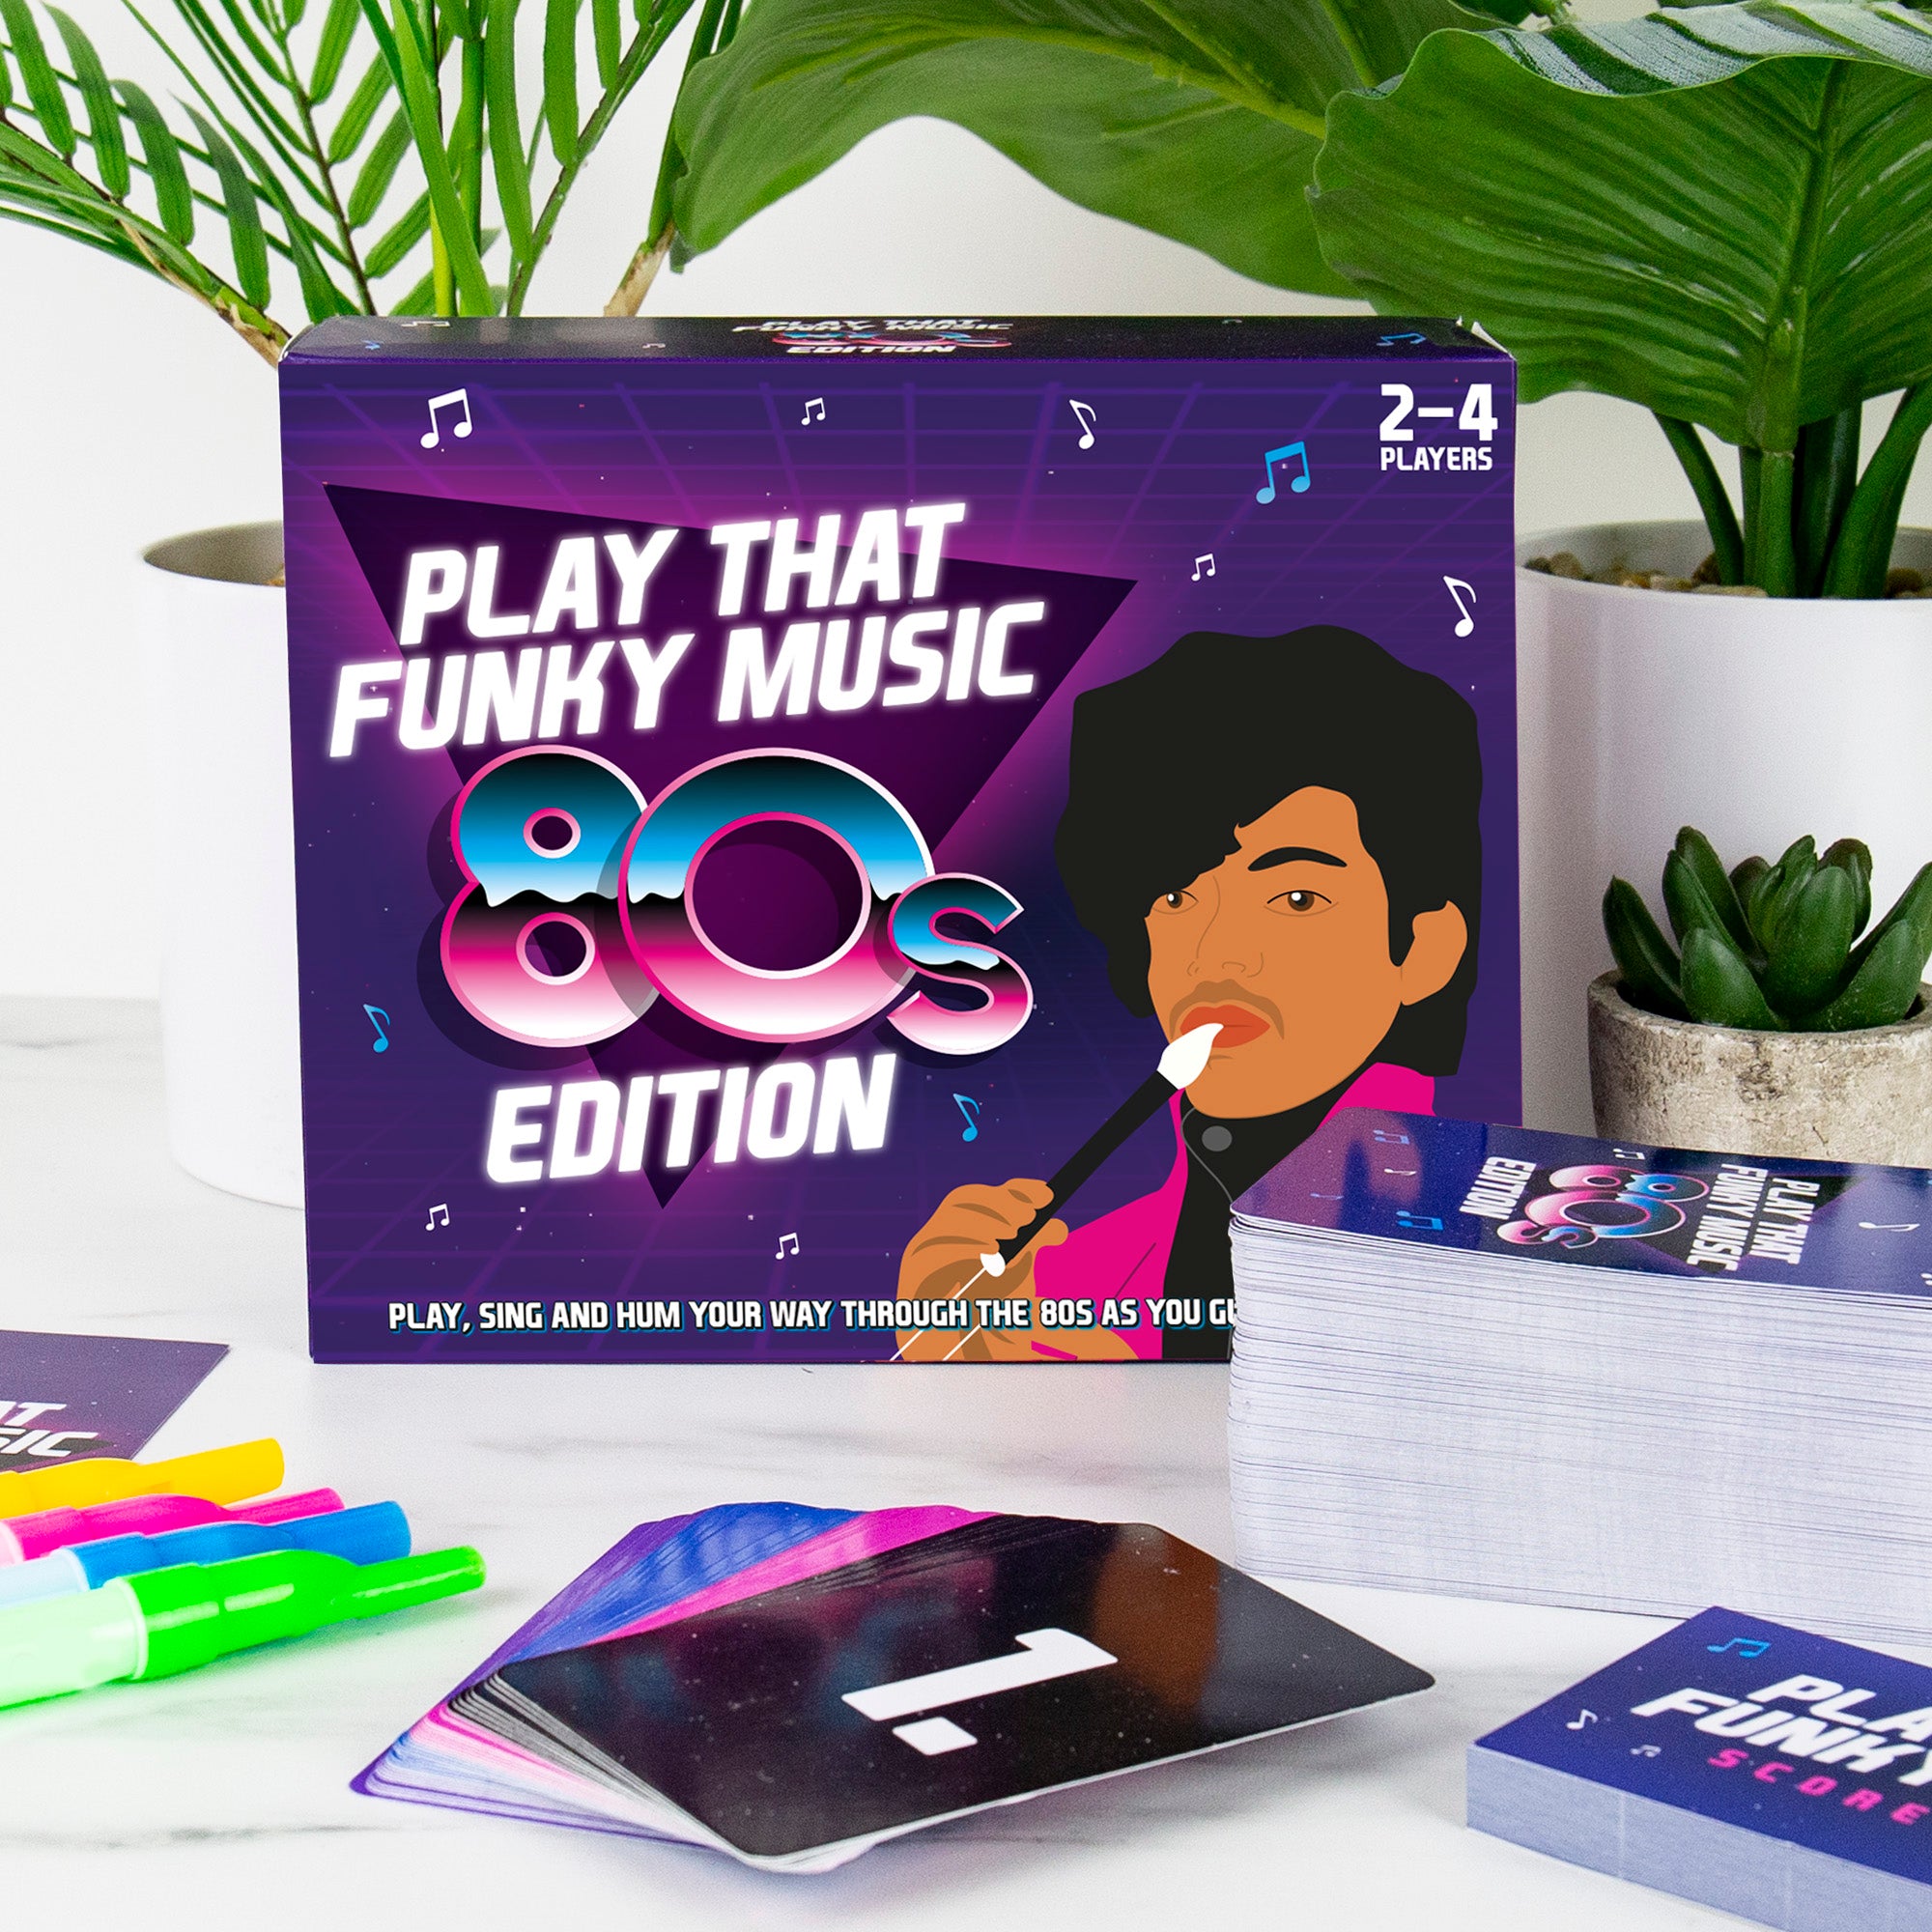 Game Play That Funky Music 80s Edition - Gift Republic